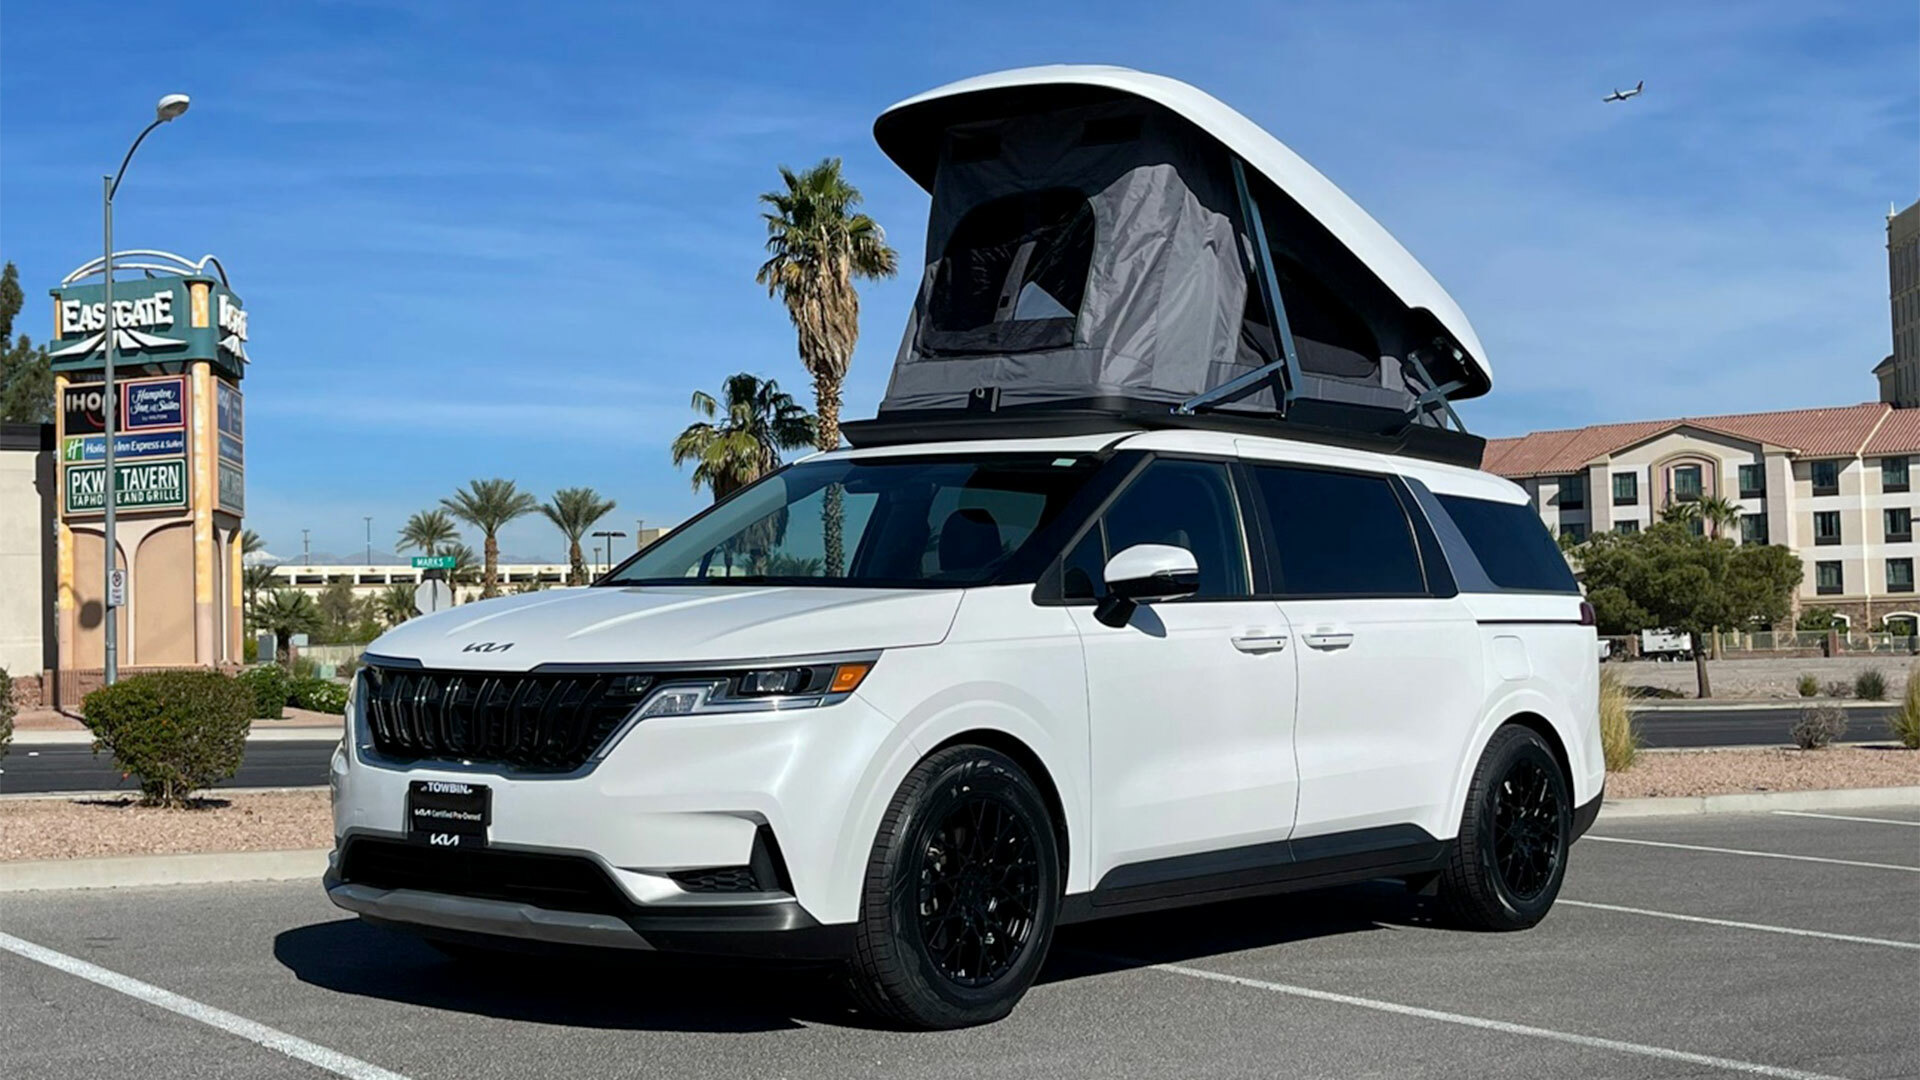 Flip Your Kia Carnival Into A Luxurious Camper With UniCamp’s 16,000